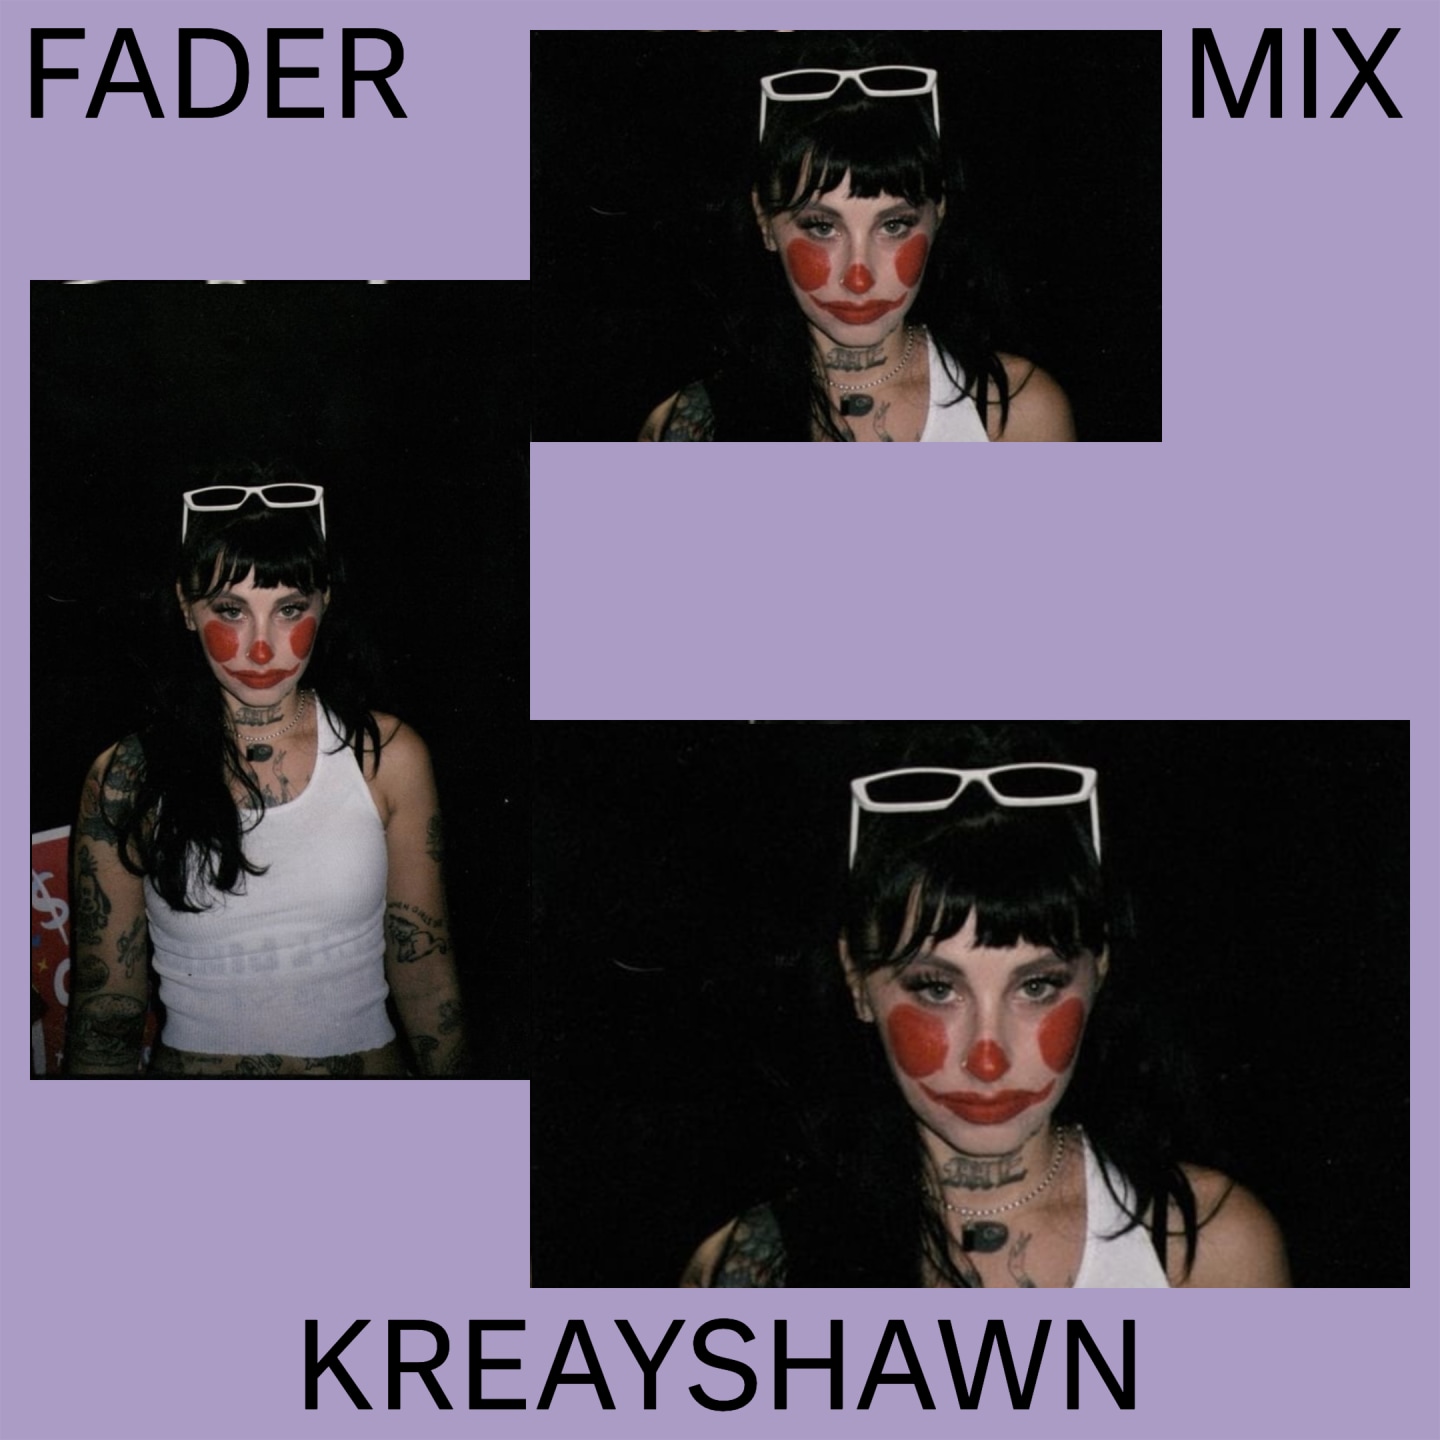 Listen to a new FADER Mix by Kreayshawn